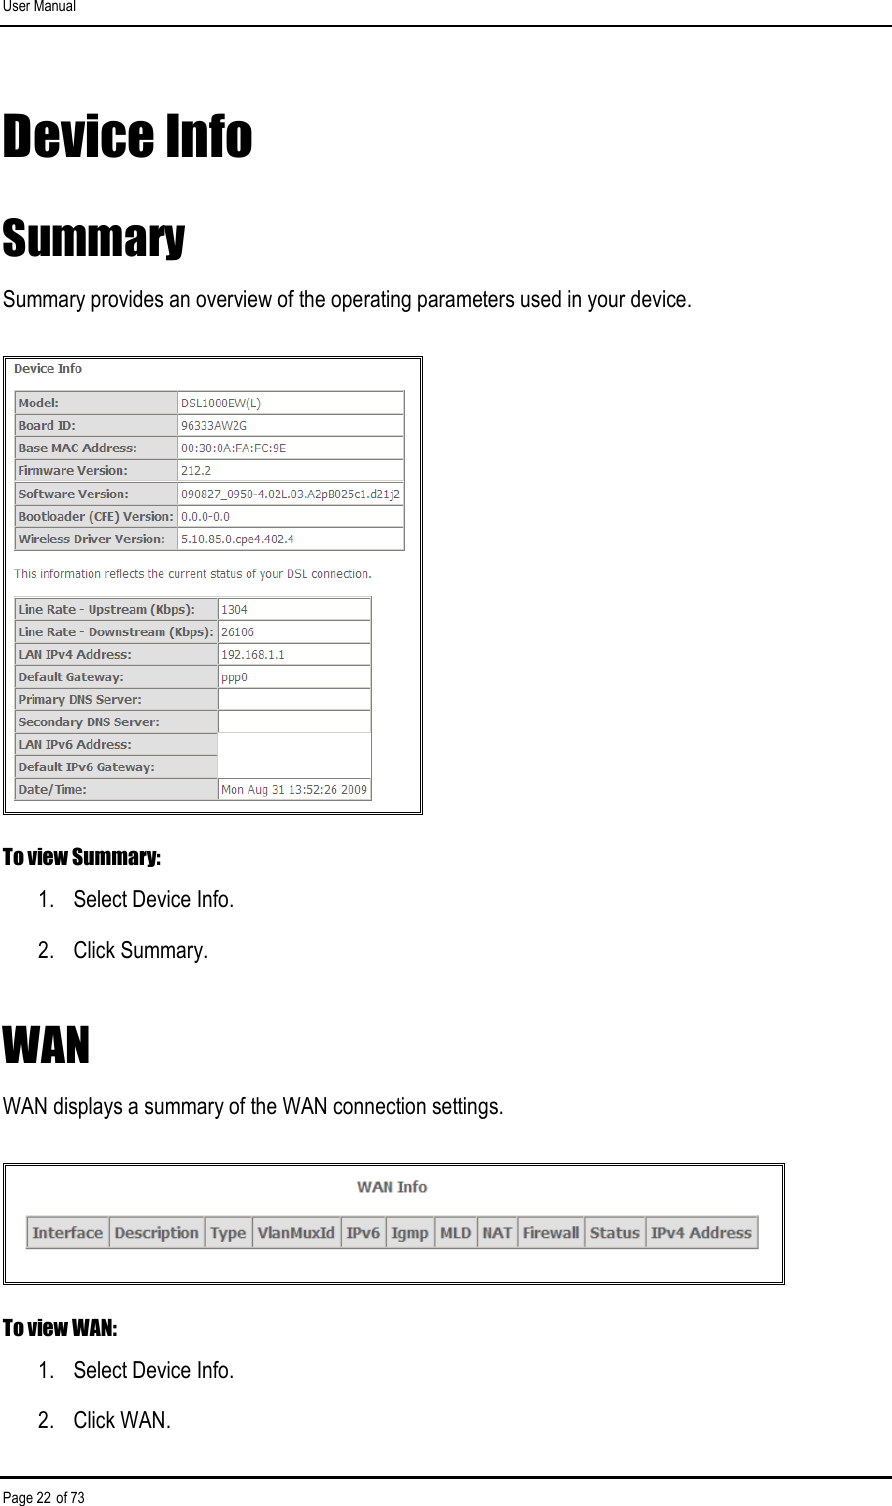 User Manual Page 22 of 73 Device Info Summary Summary provides an overview of the operating parameters used in your device.   To view Summary: 1.  Select Device Info. 2.  Click Summary. WAN WAN displays a summary of the WAN connection settings.  To view WAN: 1.  Select Device Info. 2.  Click WAN. 